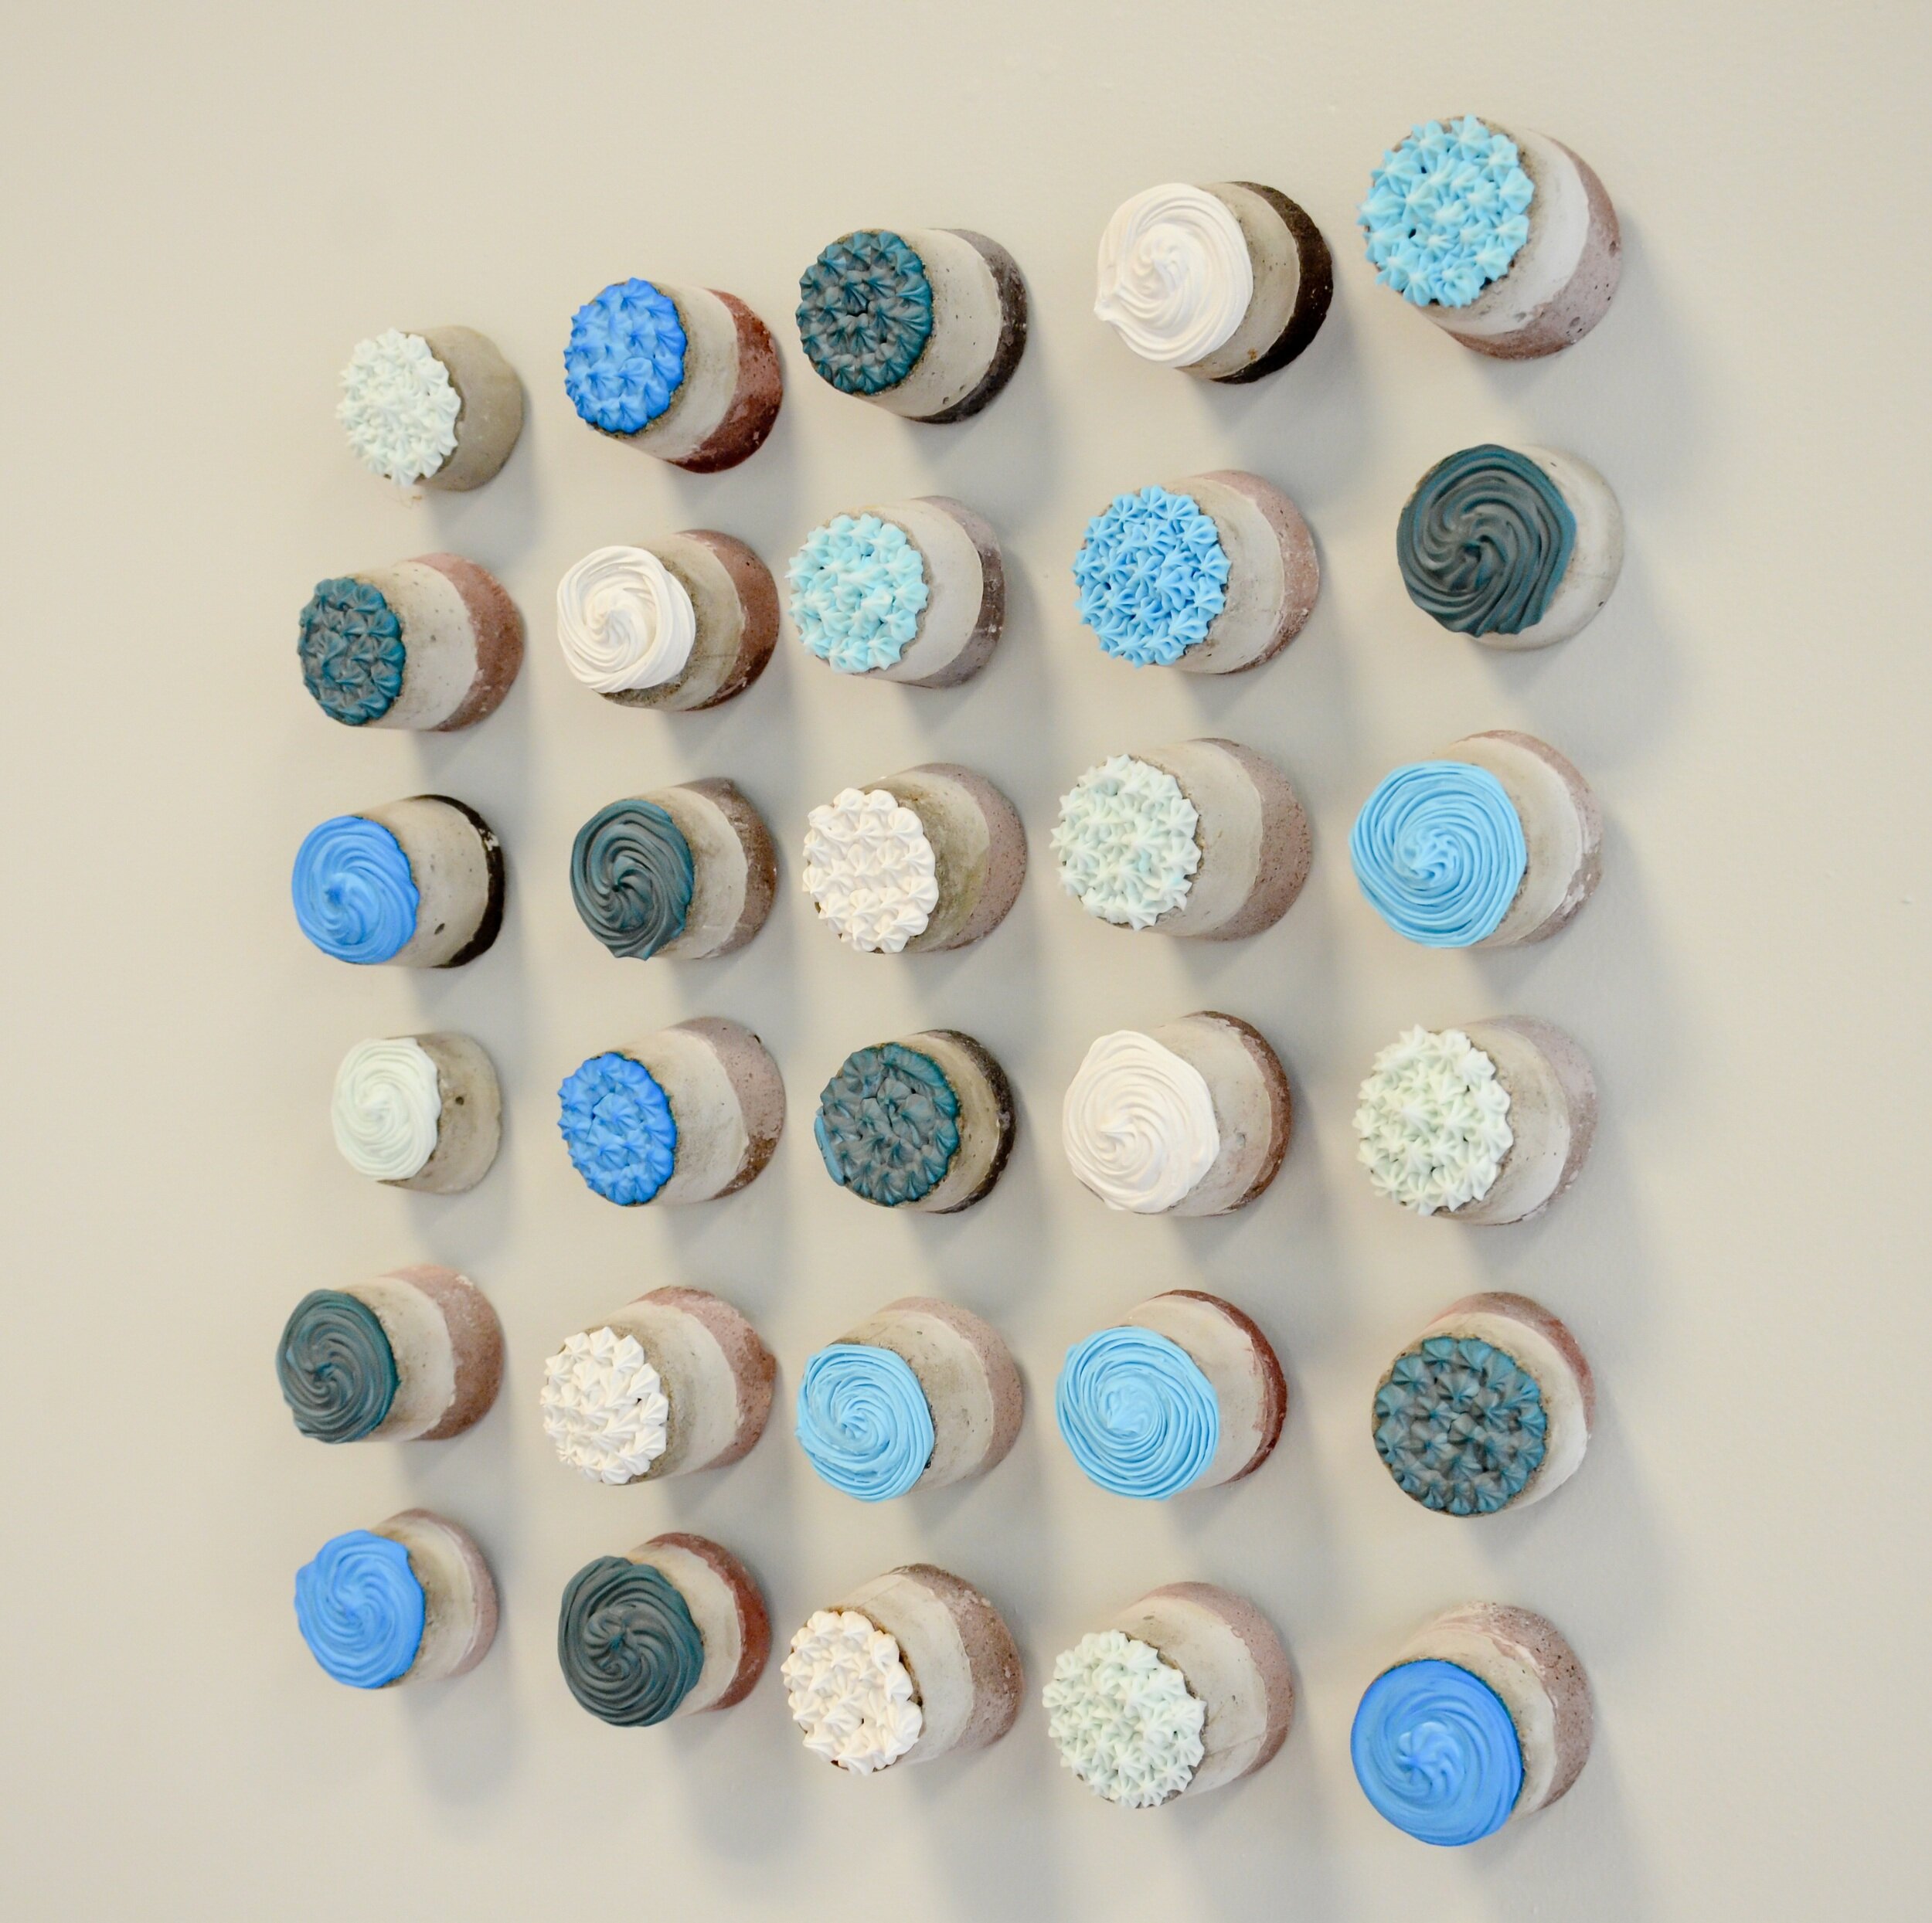   Up in Blue , 2018 Cast cement, buttercream frosting, dimensions variable: shown 18x16x3 inches 